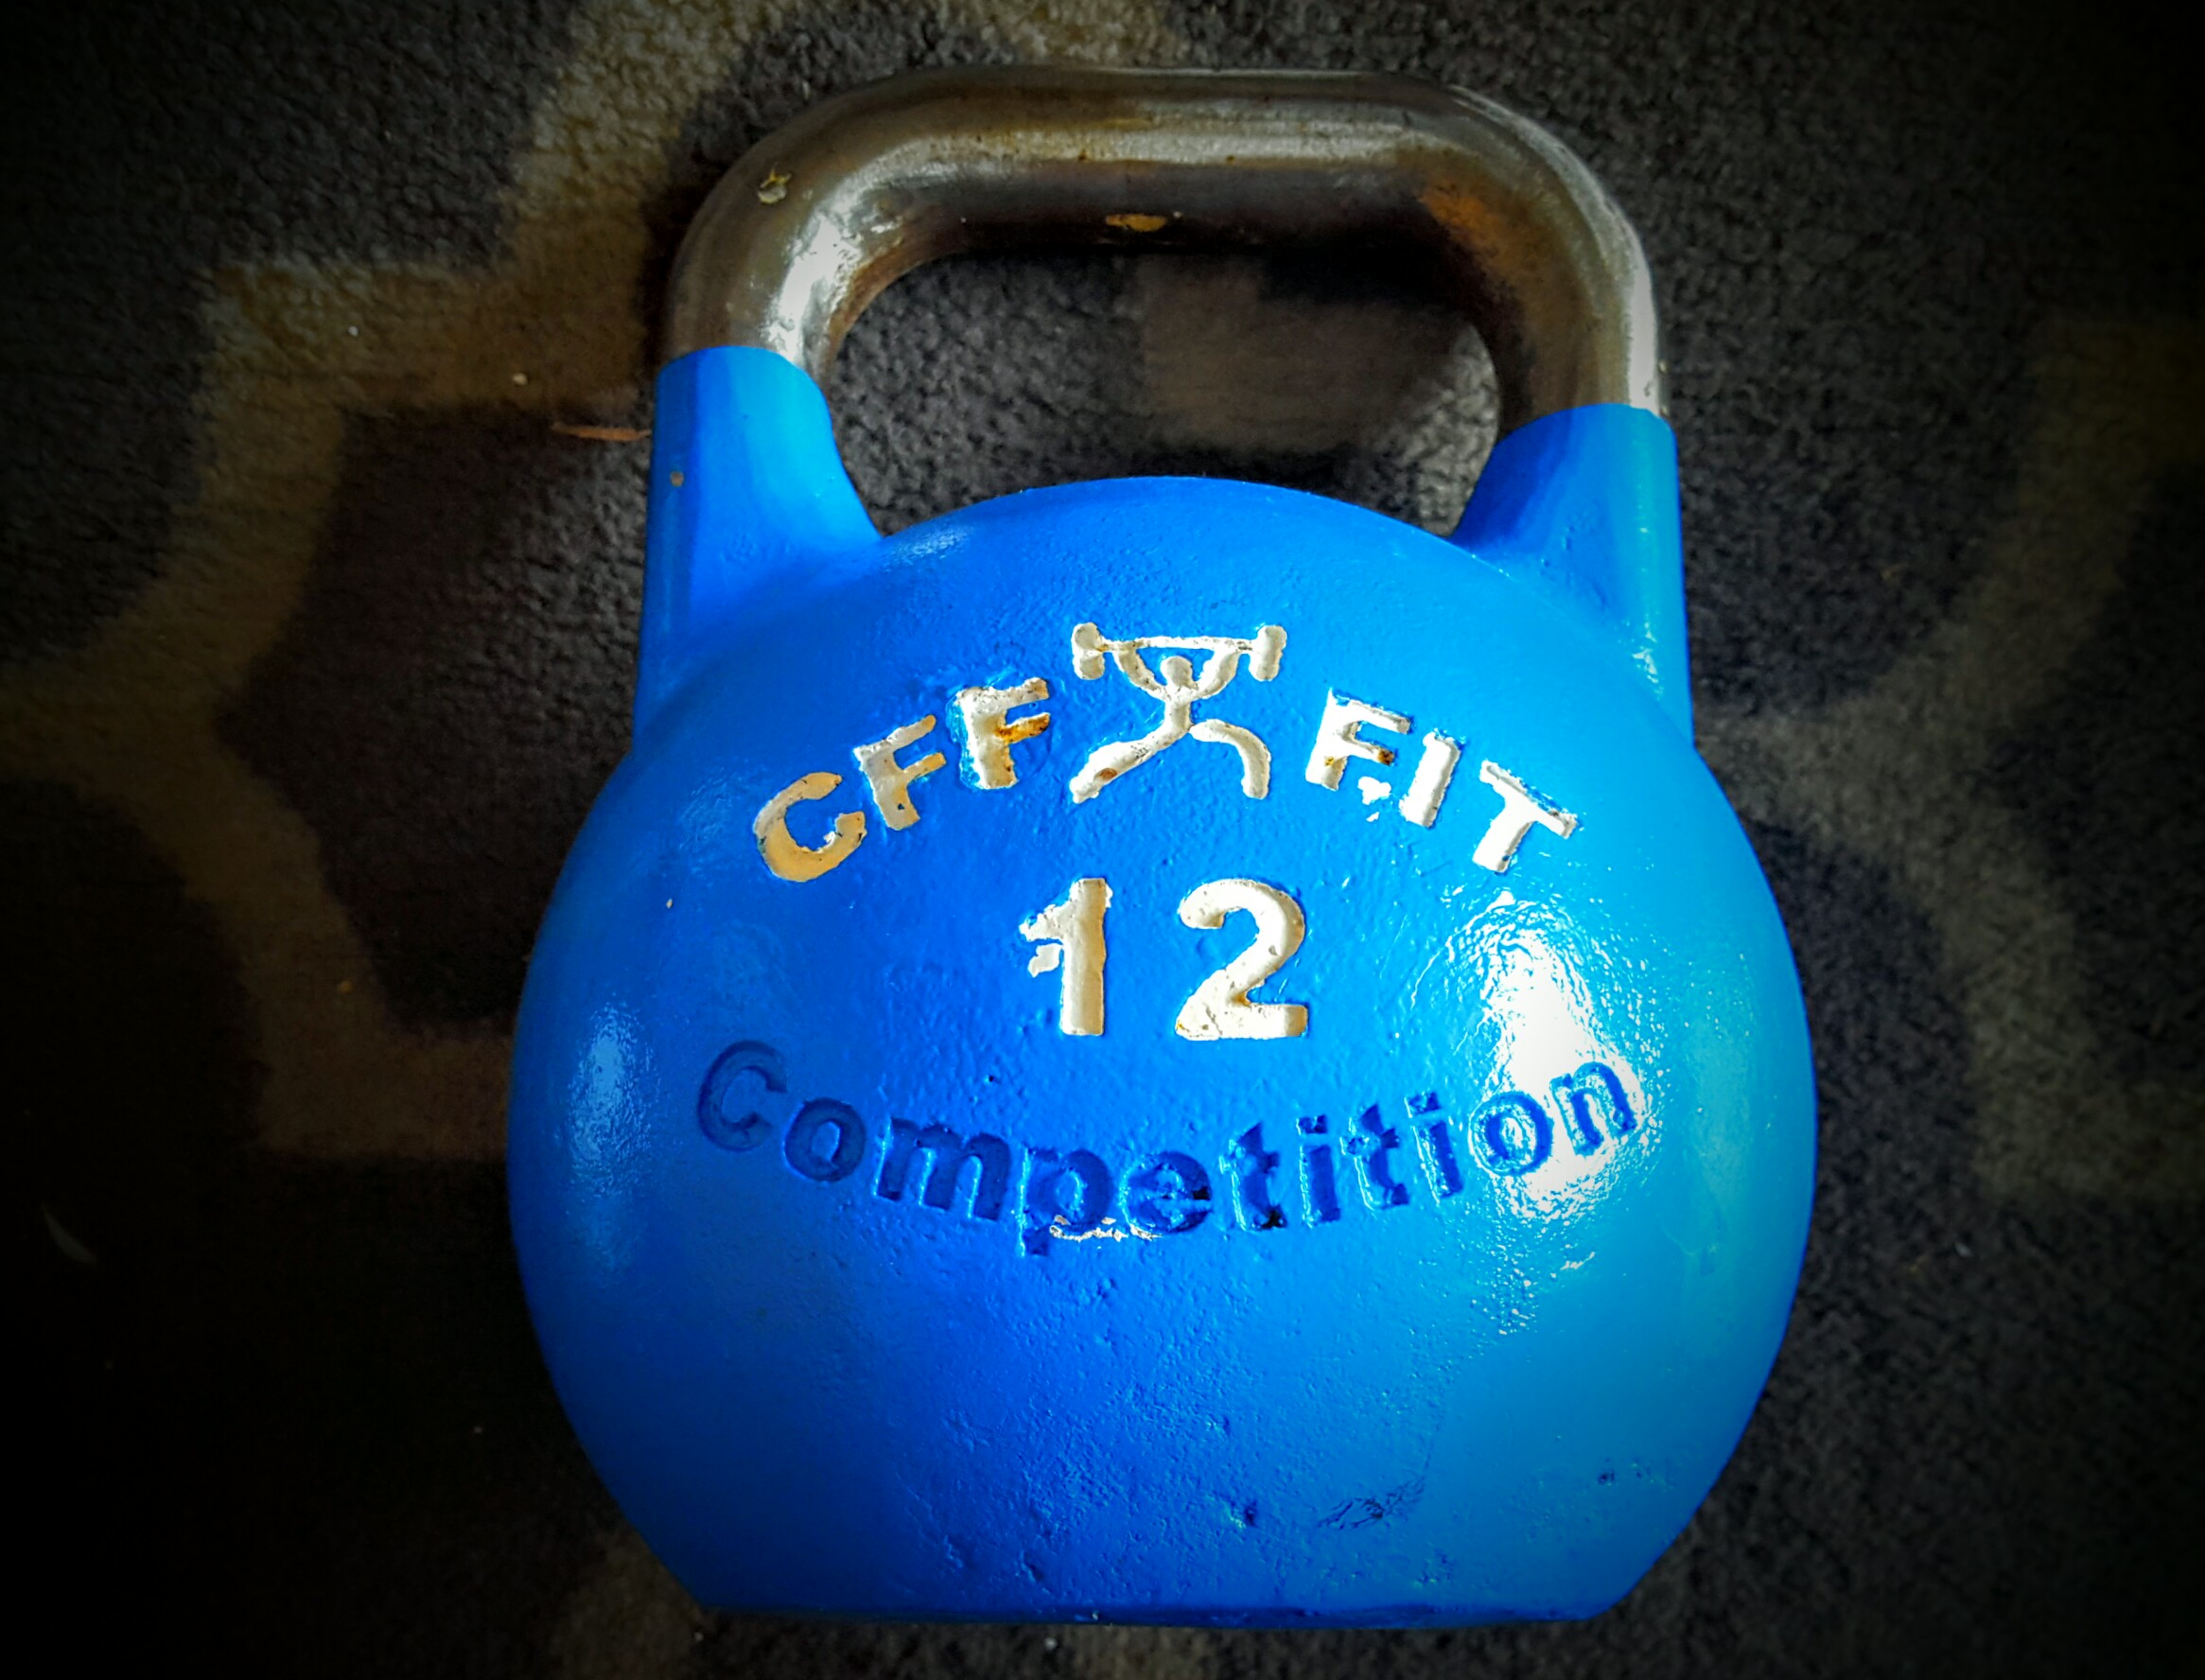 In the groove with 501 kettlebell swings